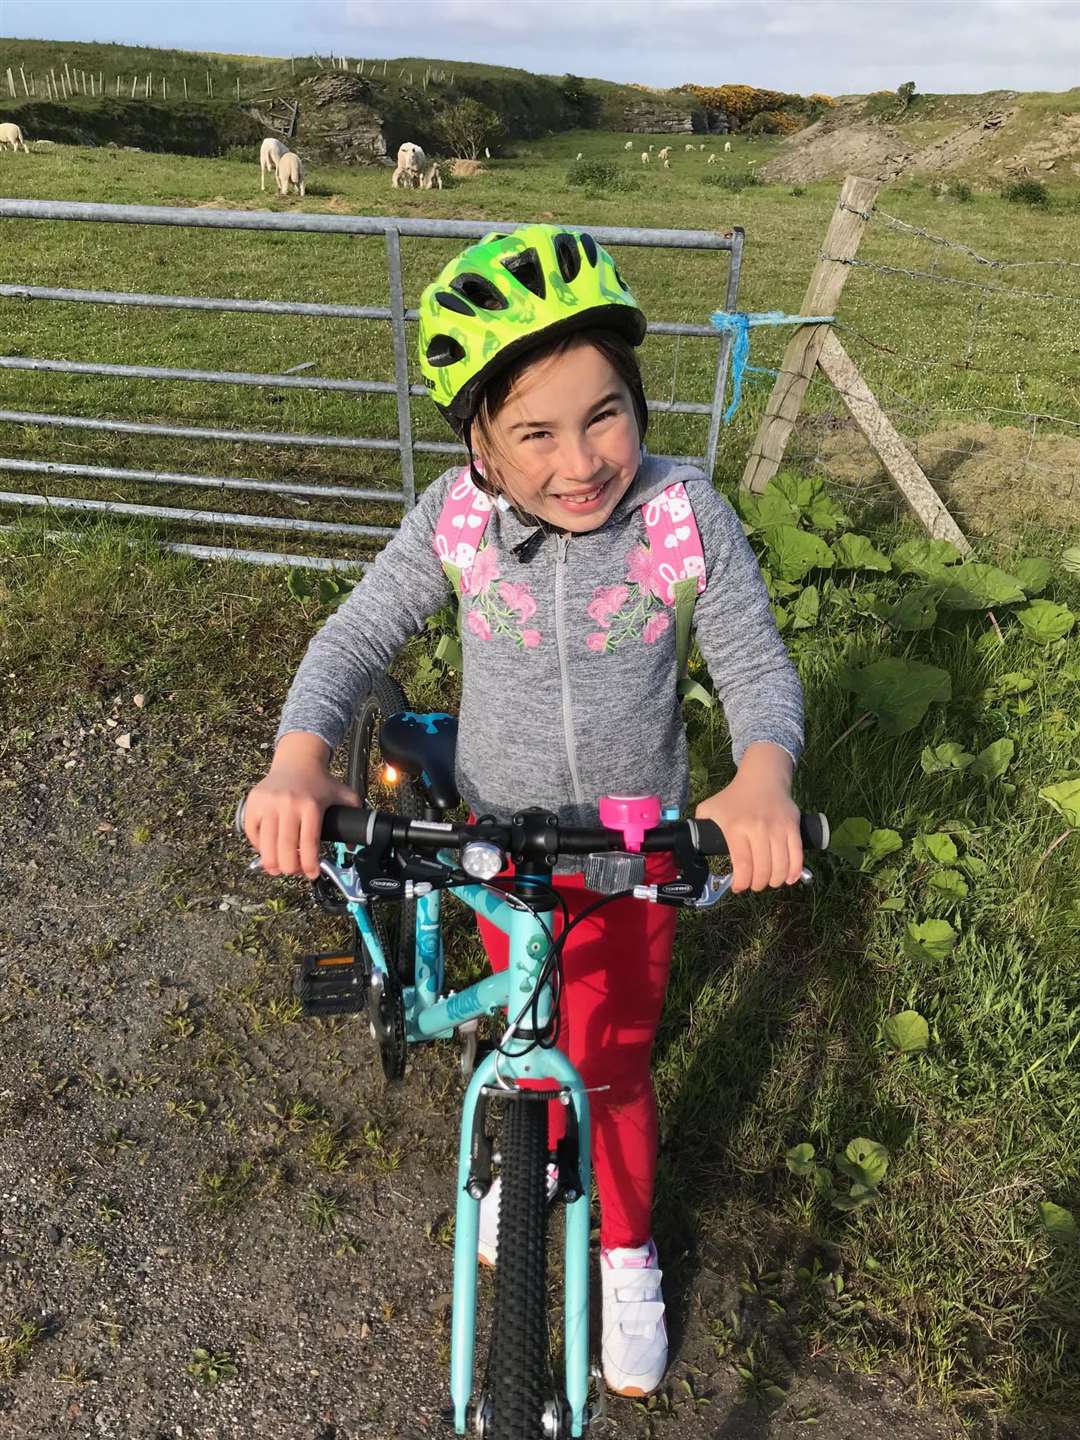 Amy taking a photo opportunity with some sheep in the background while achieving her goal of cycling 110 miles to raise money for her friends at 1st Thurso Rainbows.